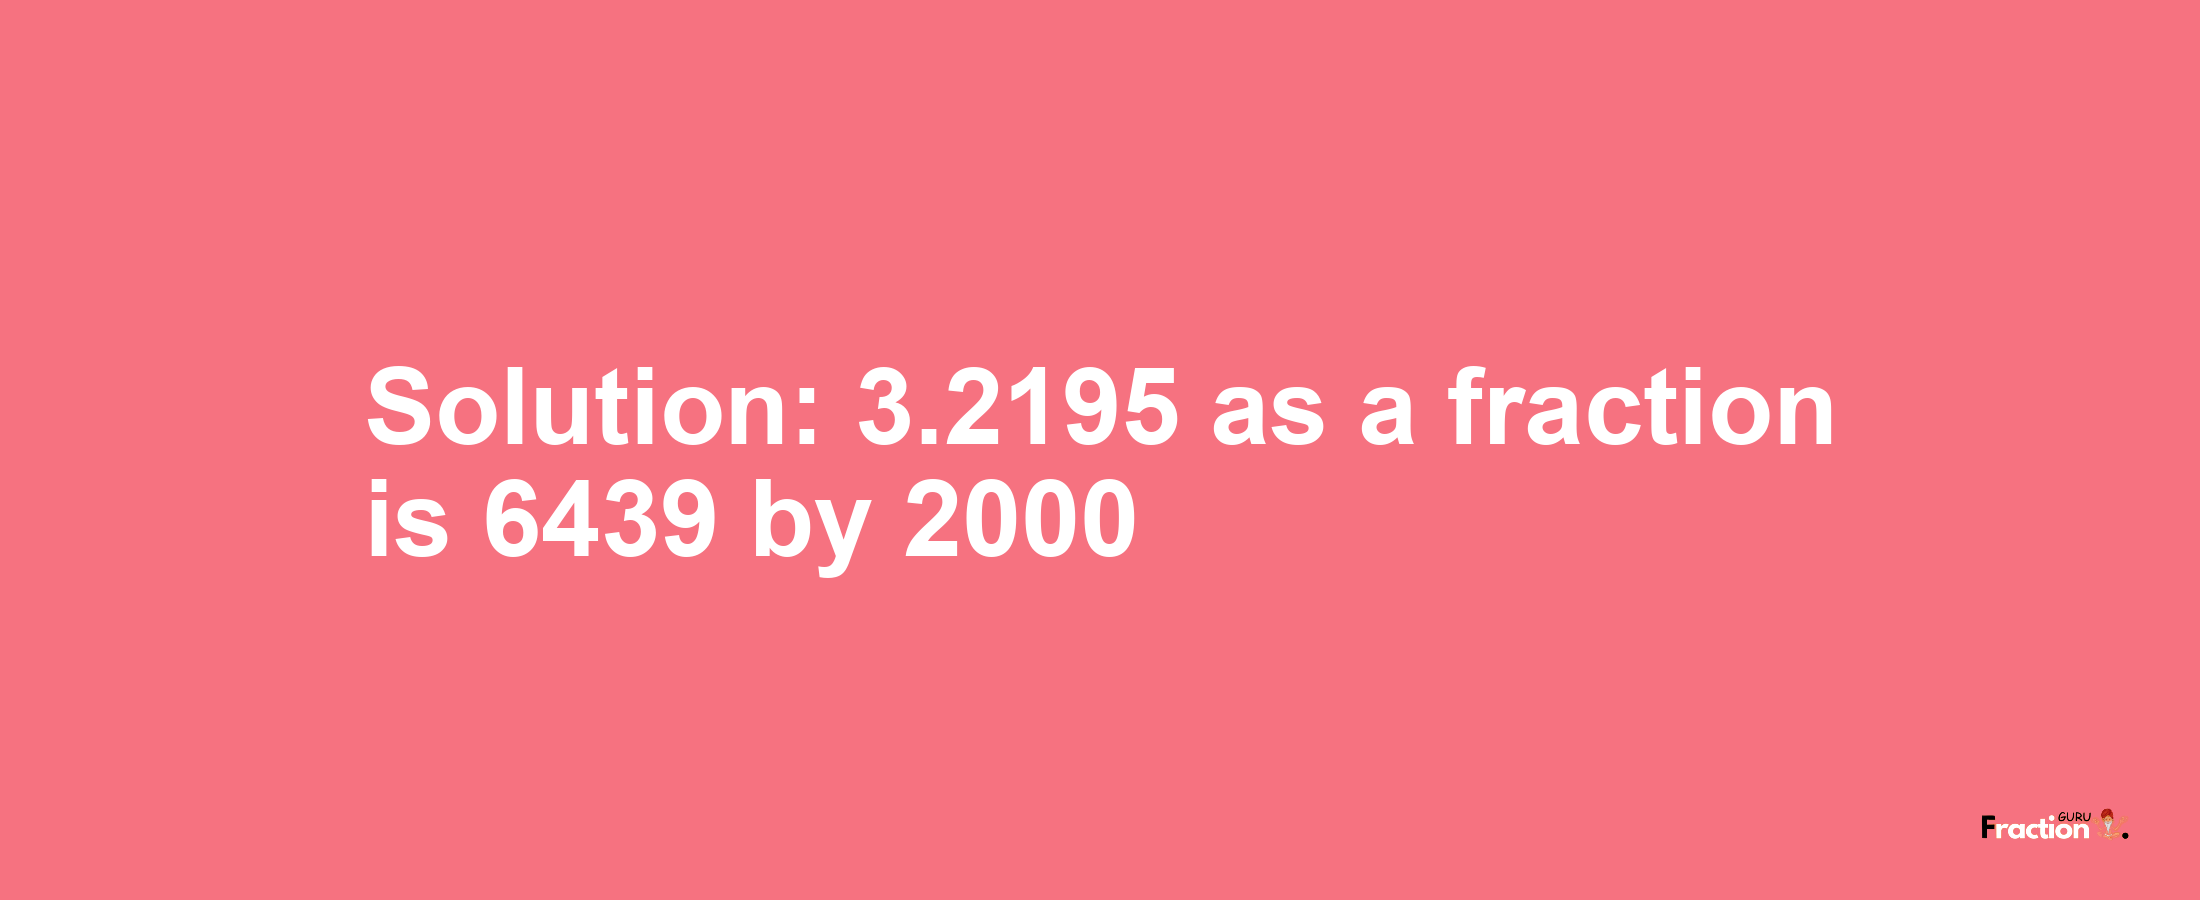 Solution:3.2195 as a fraction is 6439/2000